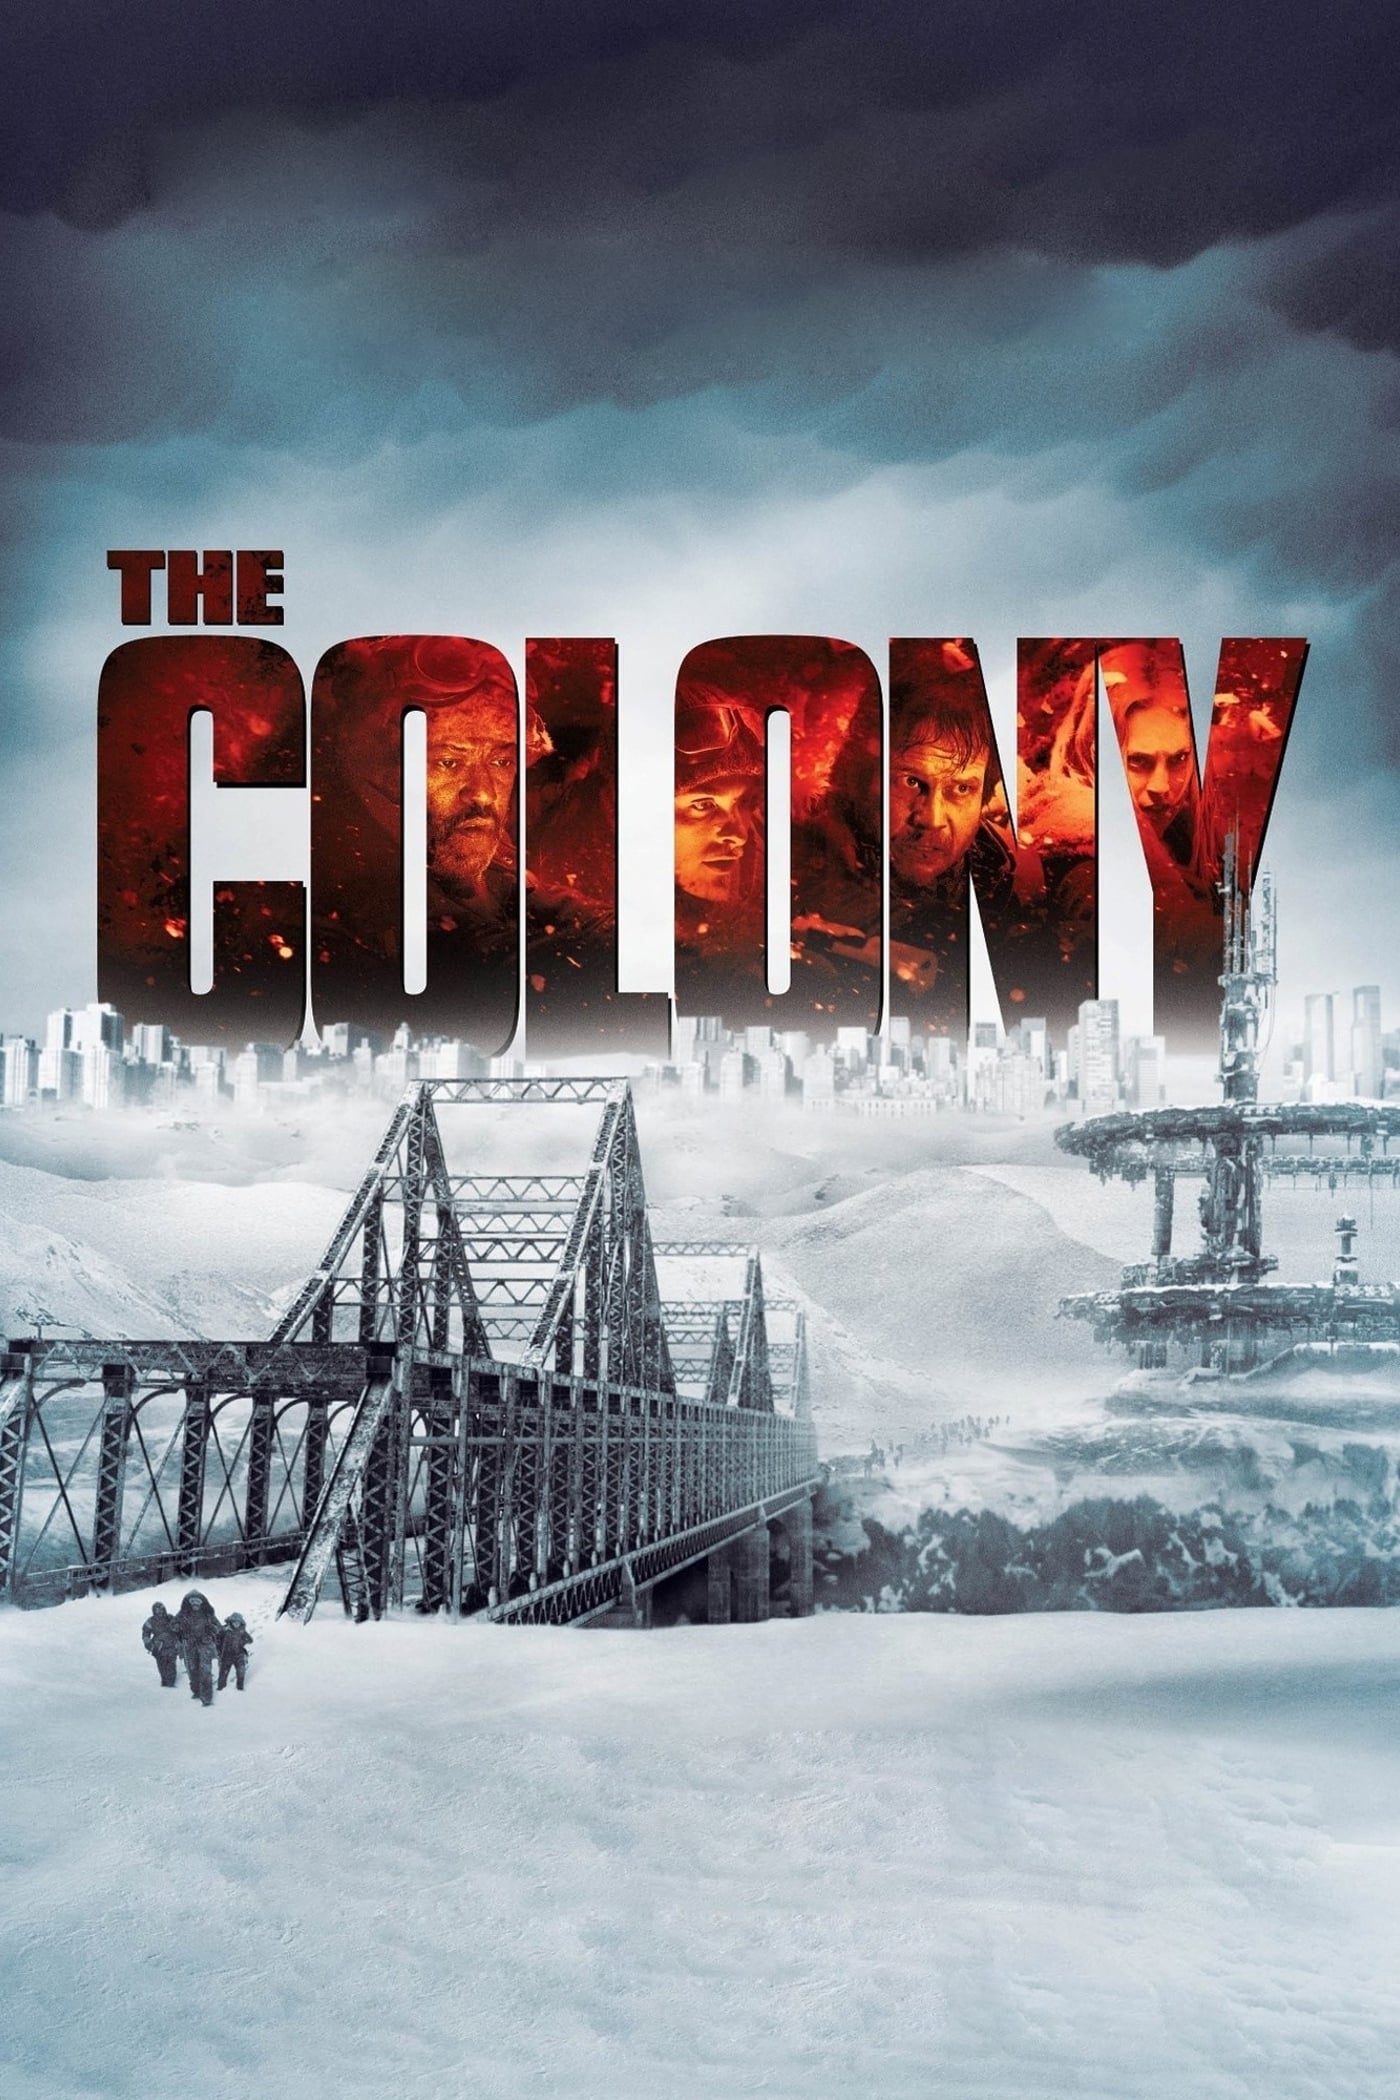 Plakat von "The Colony - Hell Freezes Over"